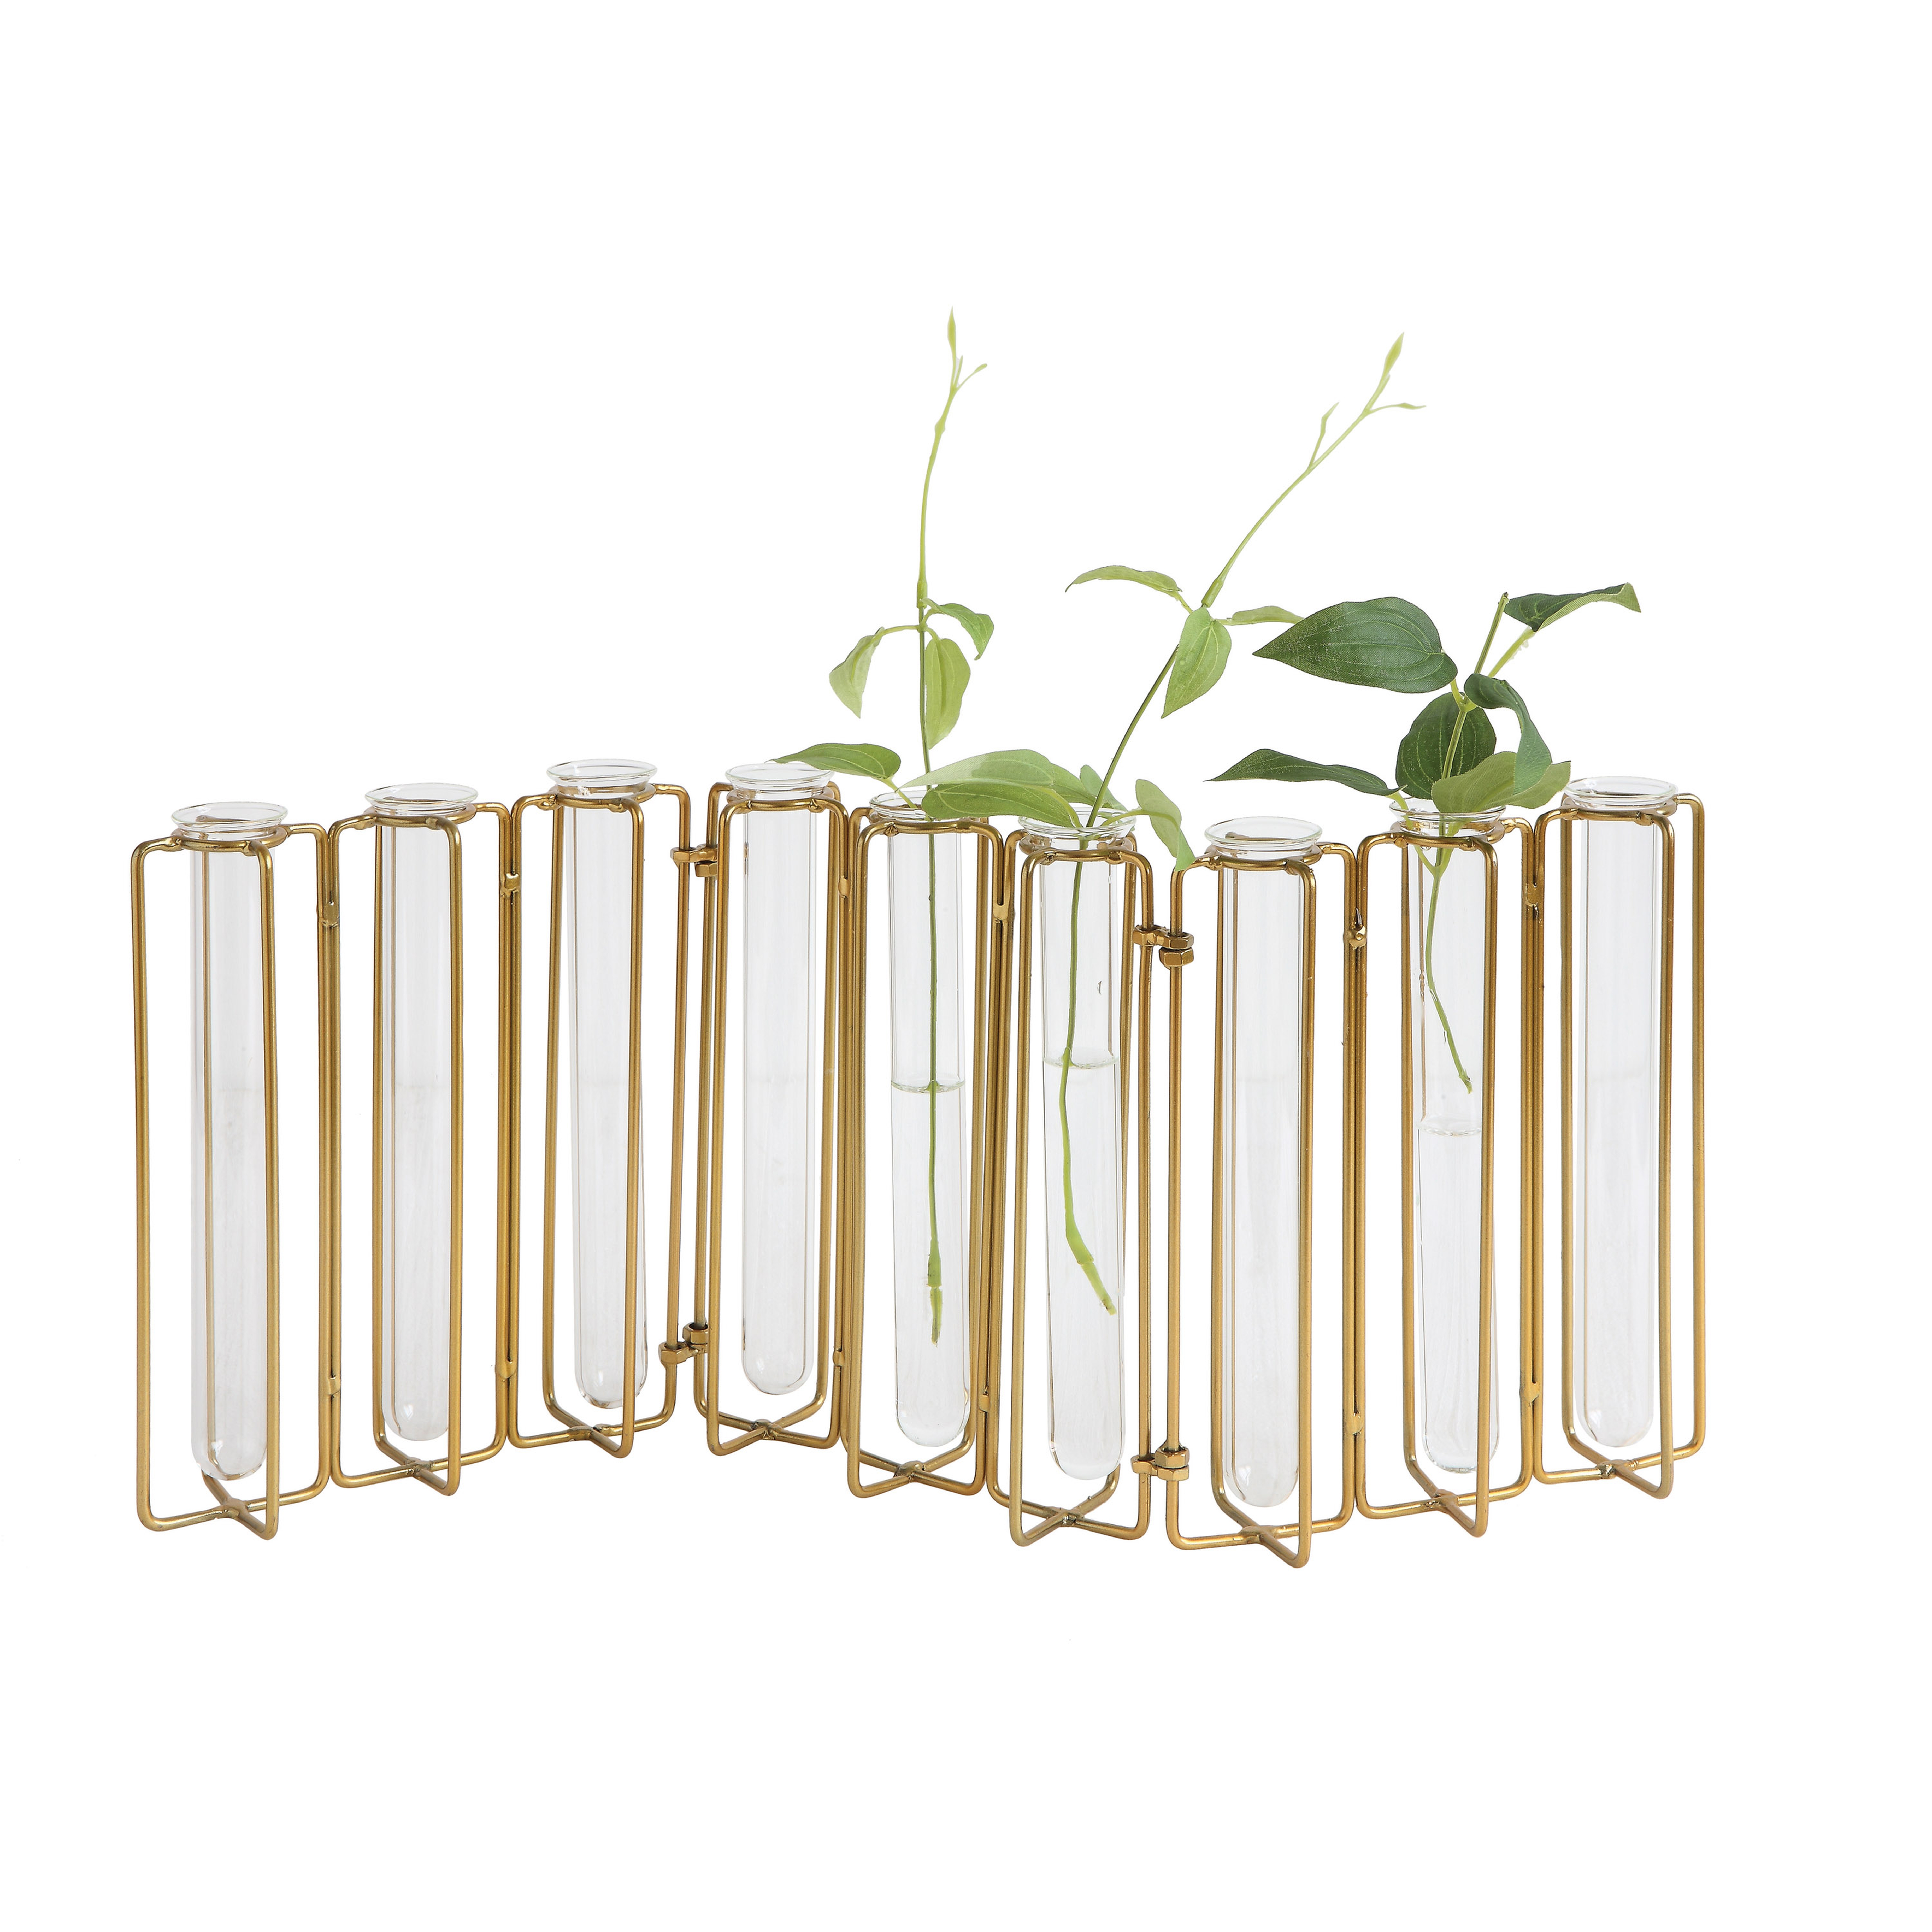 9 Test Tube Vases in a Single Gold Metal Stand - Nomad Home